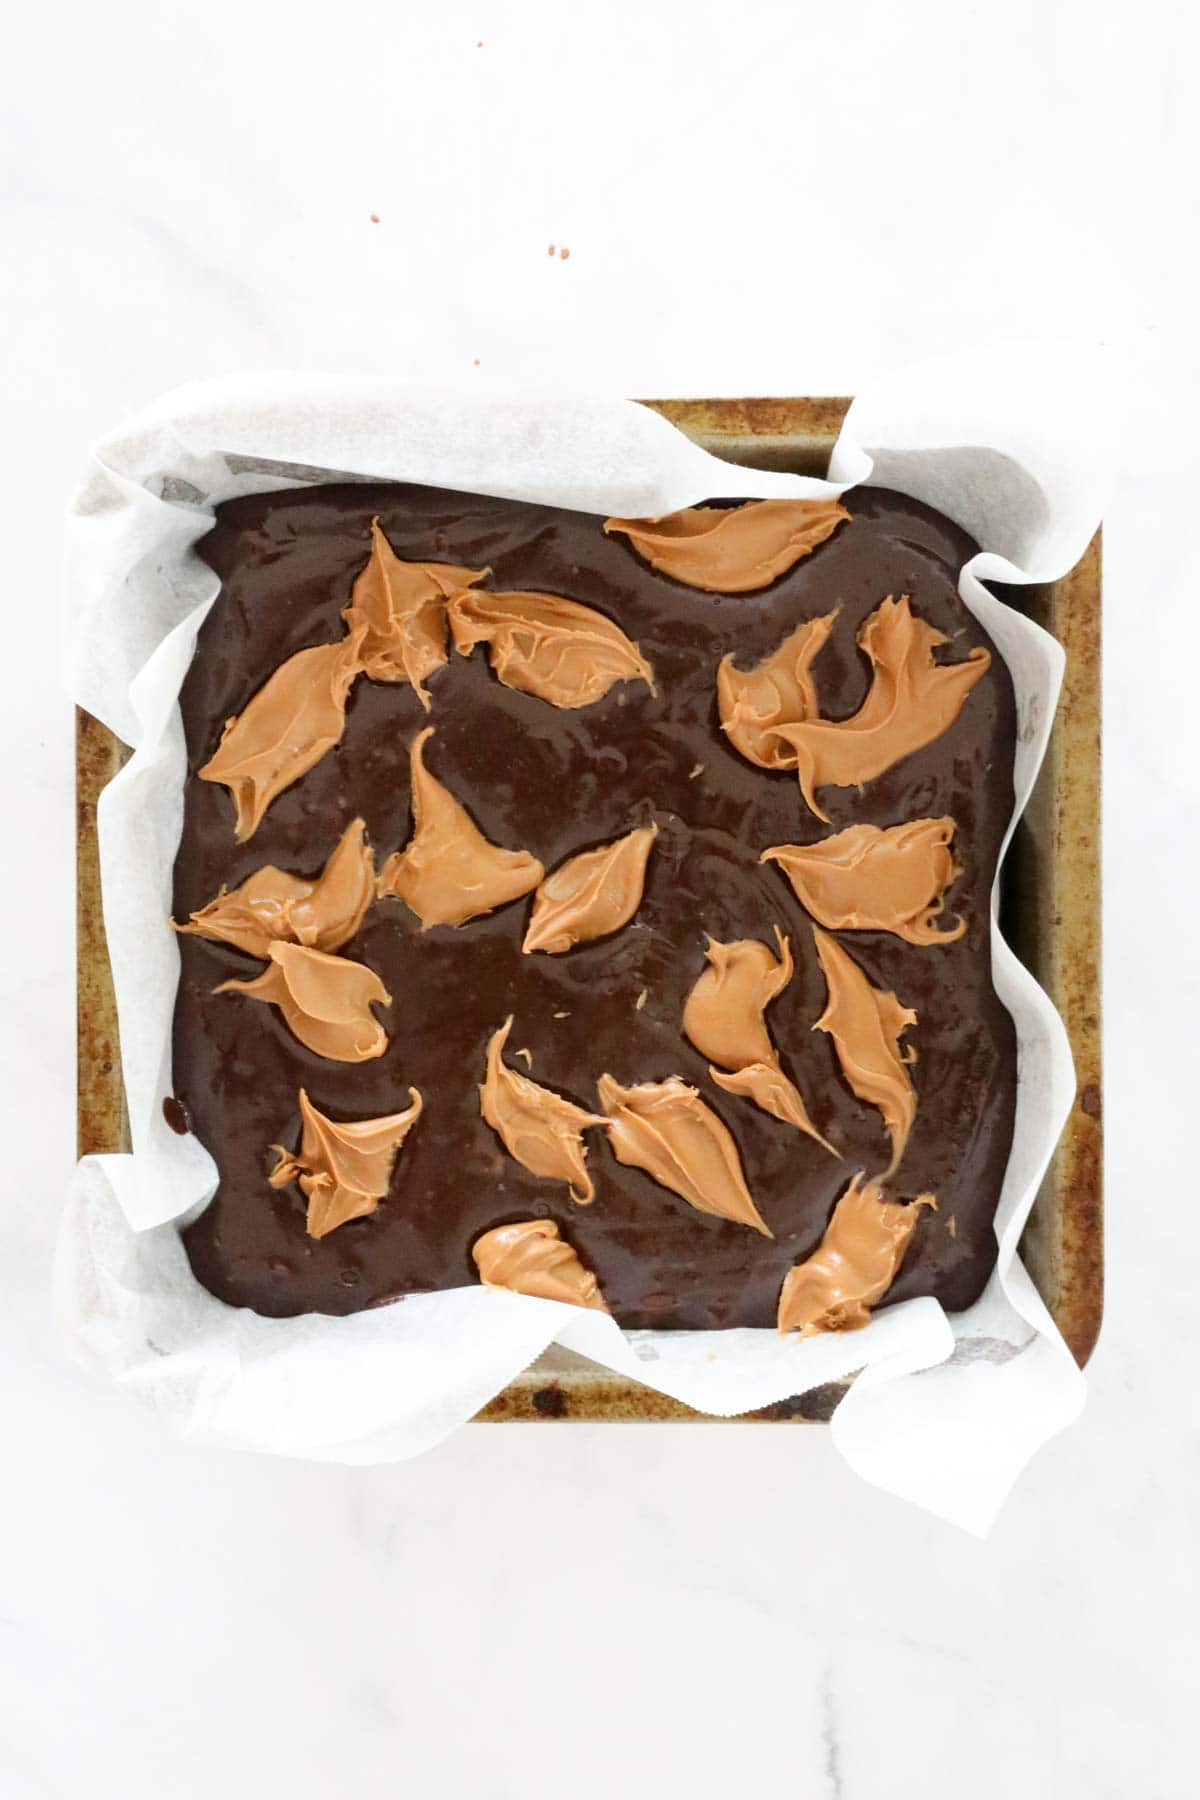 Dollops of Biscoff spread placed over the top of slice mix in a lined baking tin.